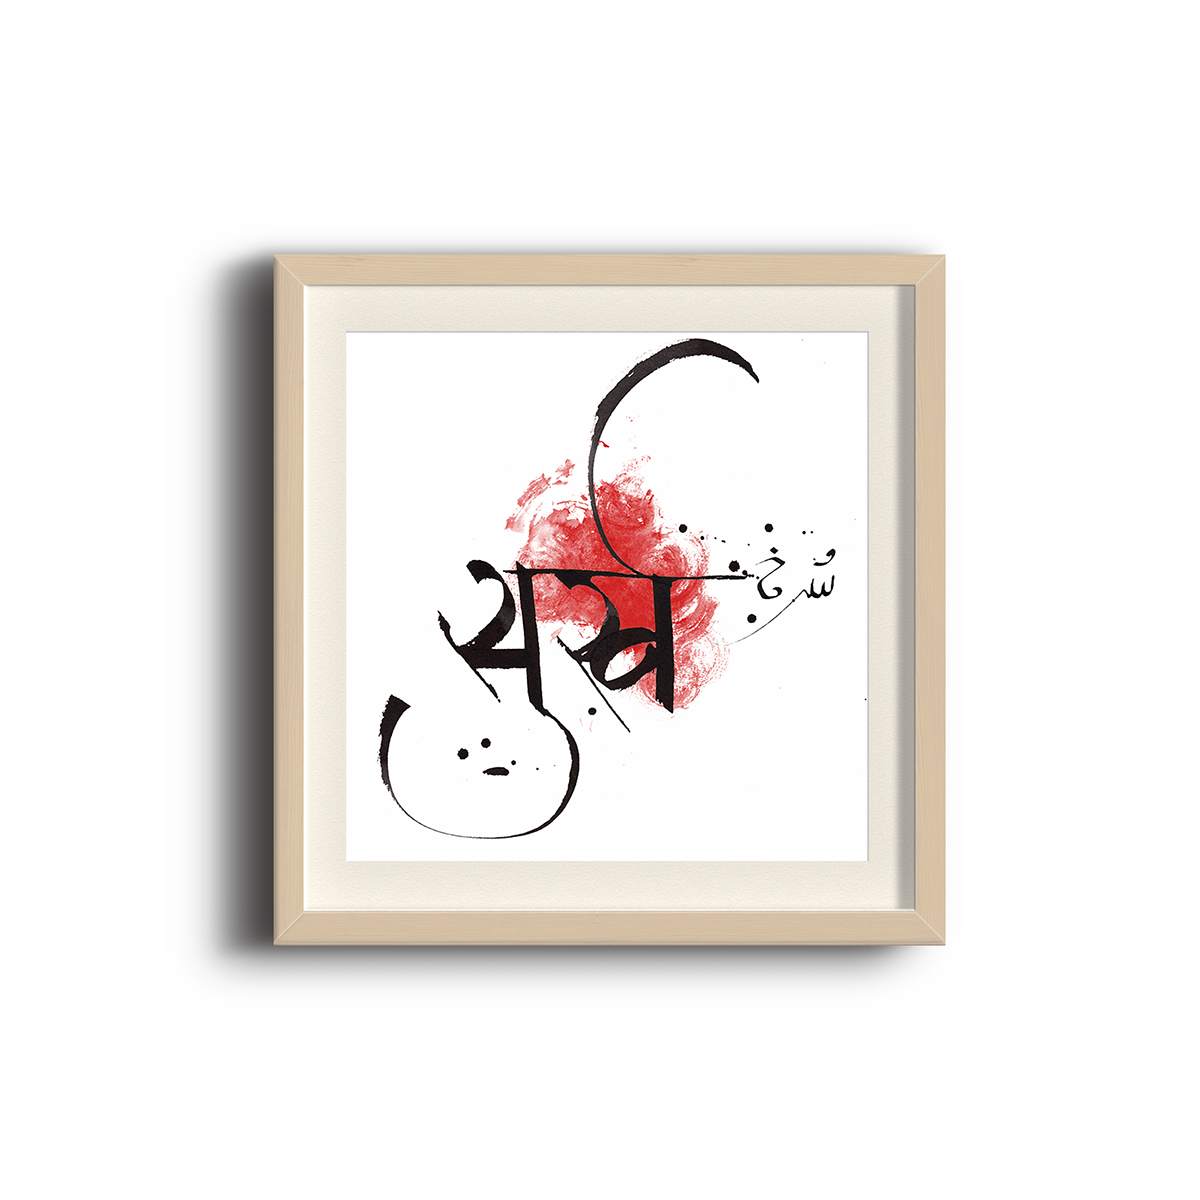 expressive calligraphy art design language French portugese persian hindi Calligraphy  